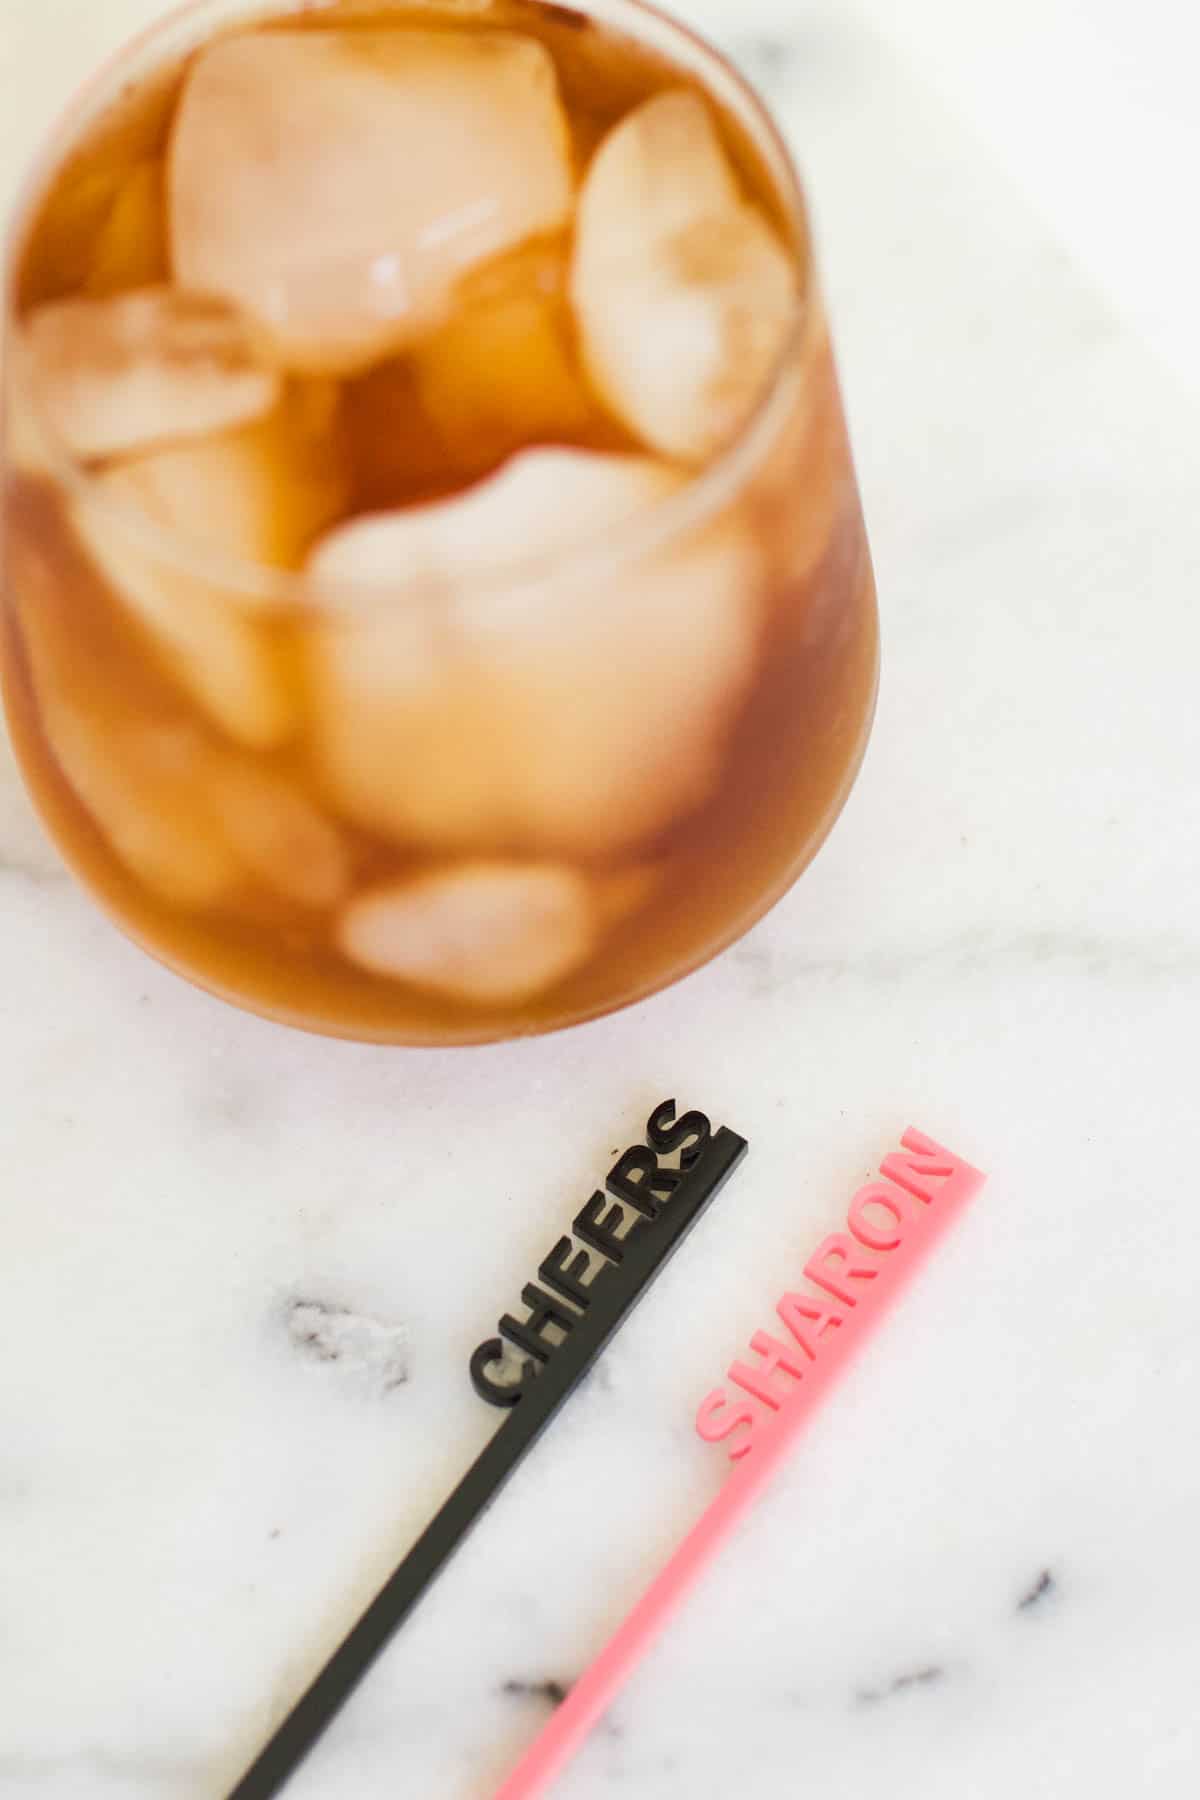 Custom drink stirrers for cocktails and drinks.